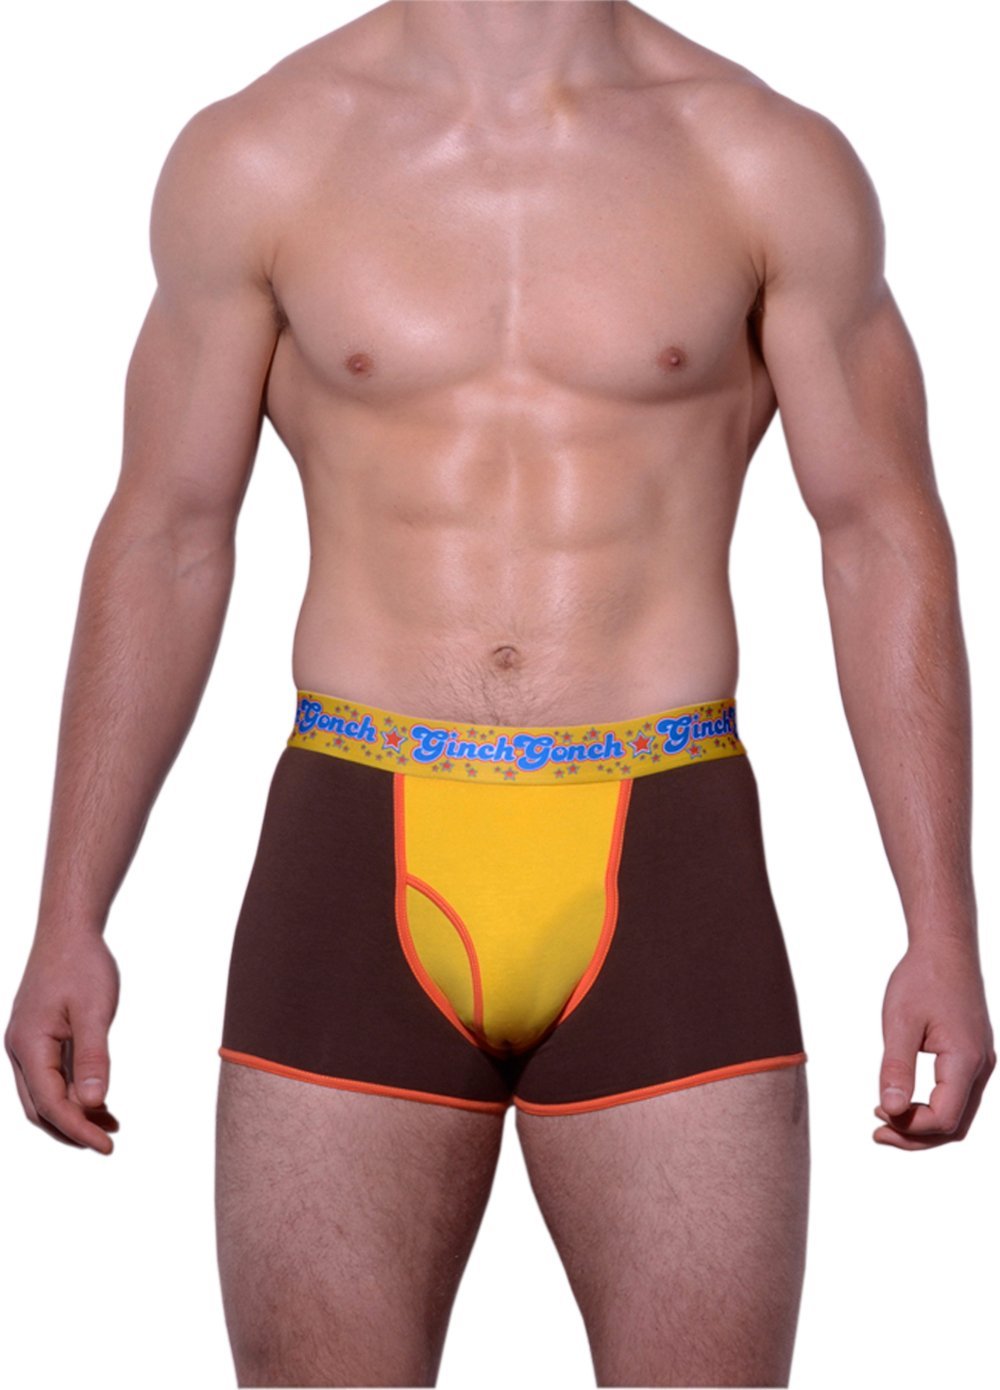 GG Ginch Gonch Lemon Heads men's underwear y front boxer brief trunk with yellow and brown panels, orange trim, and a printed yellow waistband. front. 